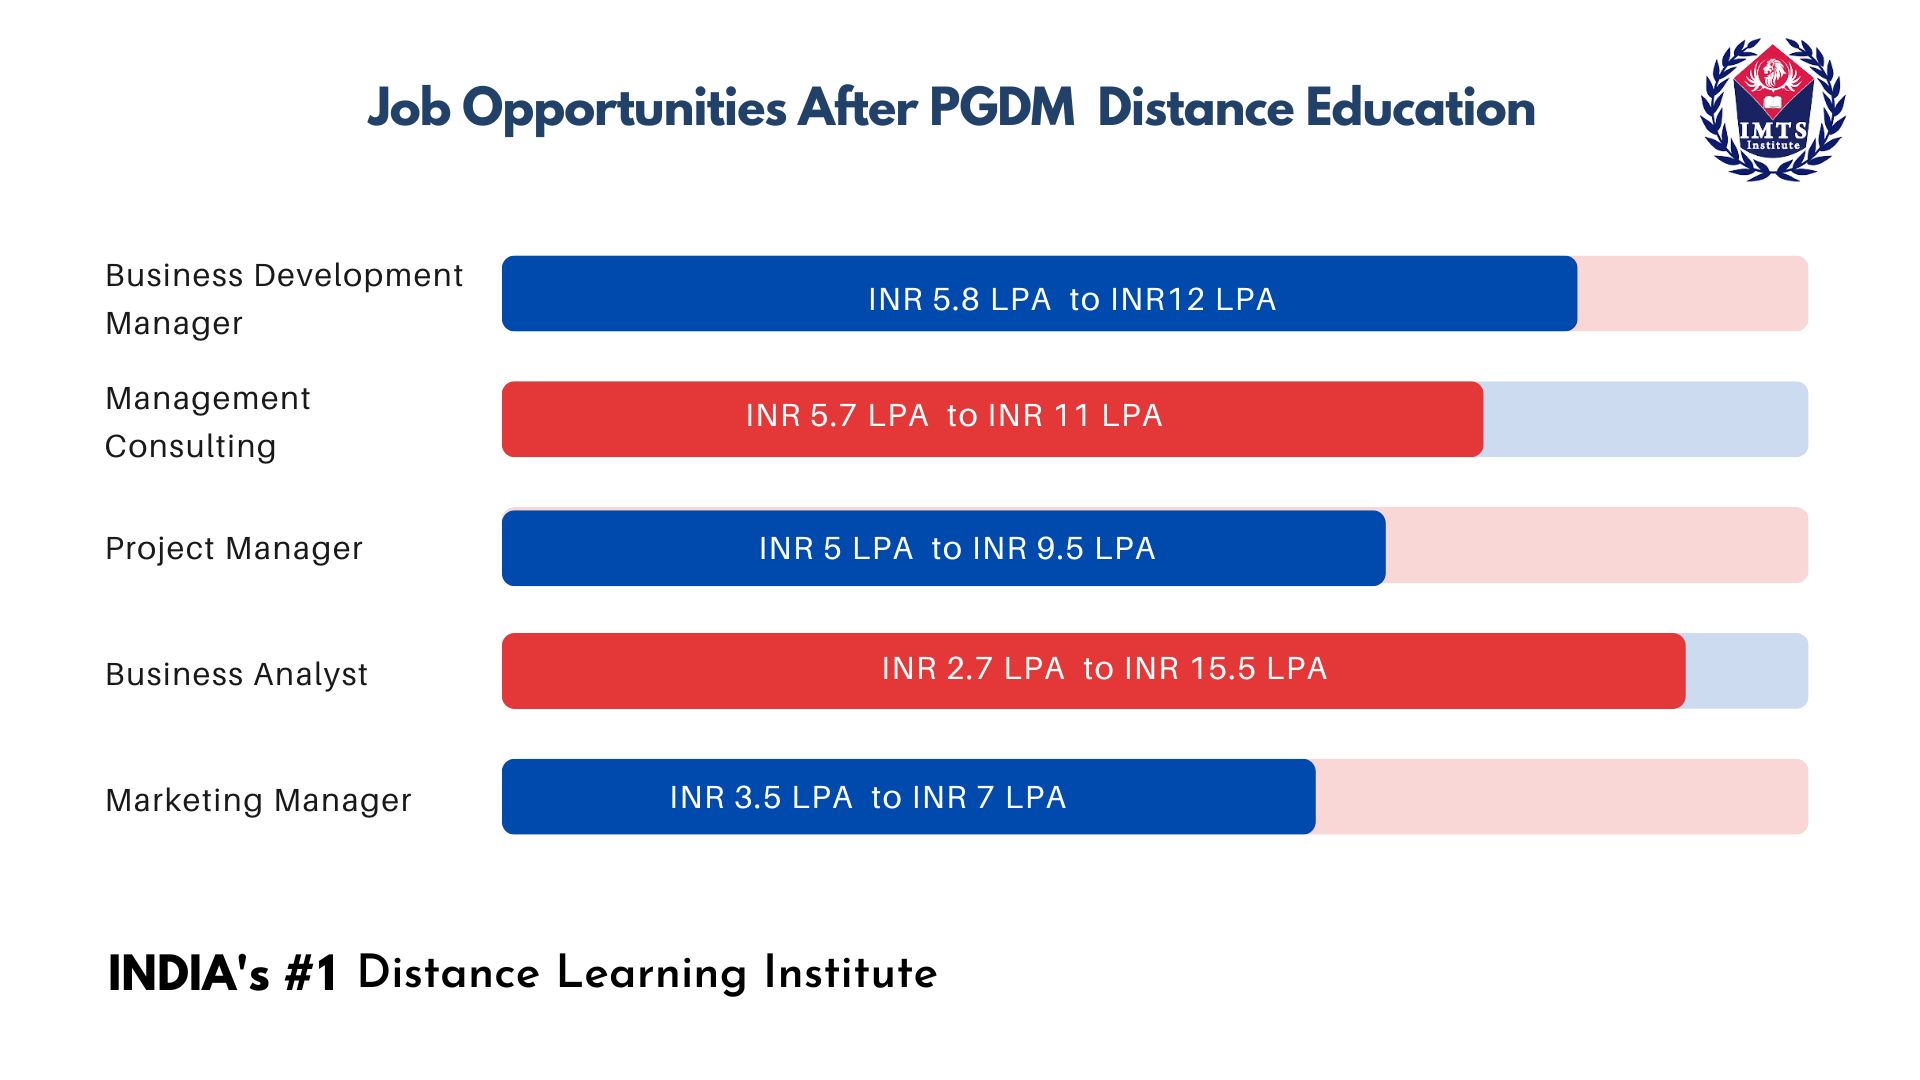  Job Opportunities After PGDM Distance Education